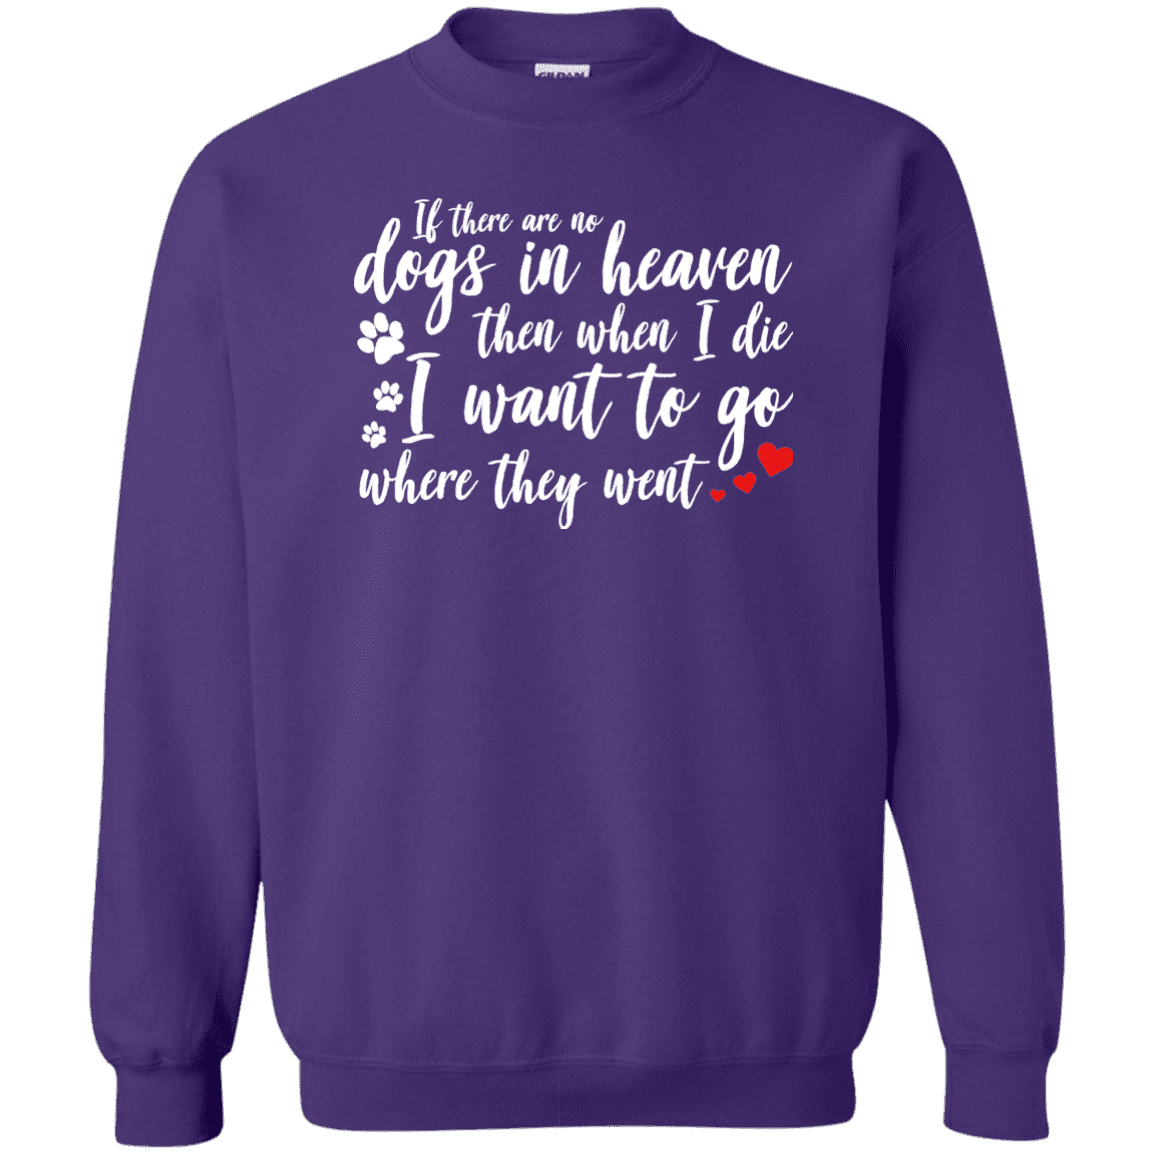 If There Are No Dogs In Heaven - Sweatshirt.